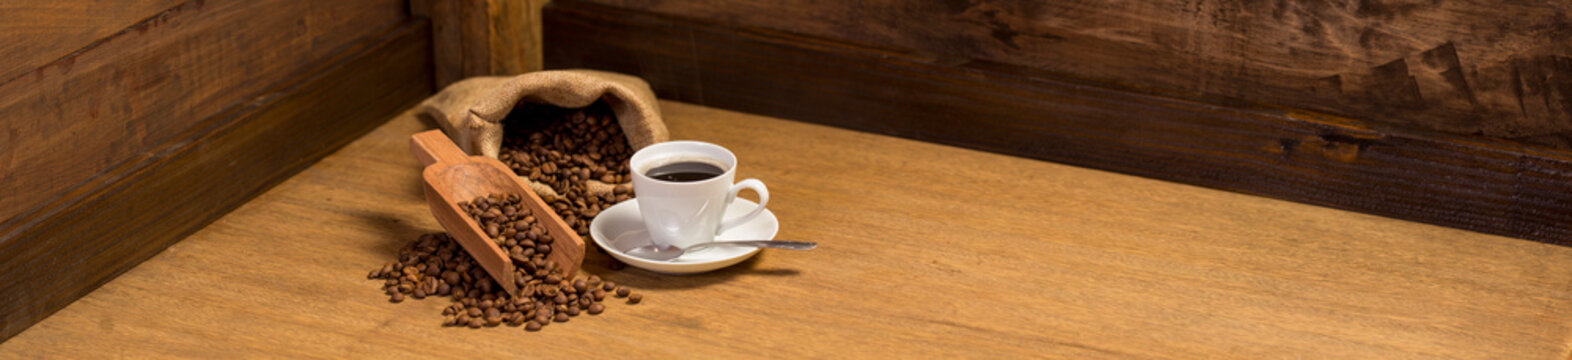 cup of coffee with bag and spoon full of beans on wooden background. panoramic image with copy space.